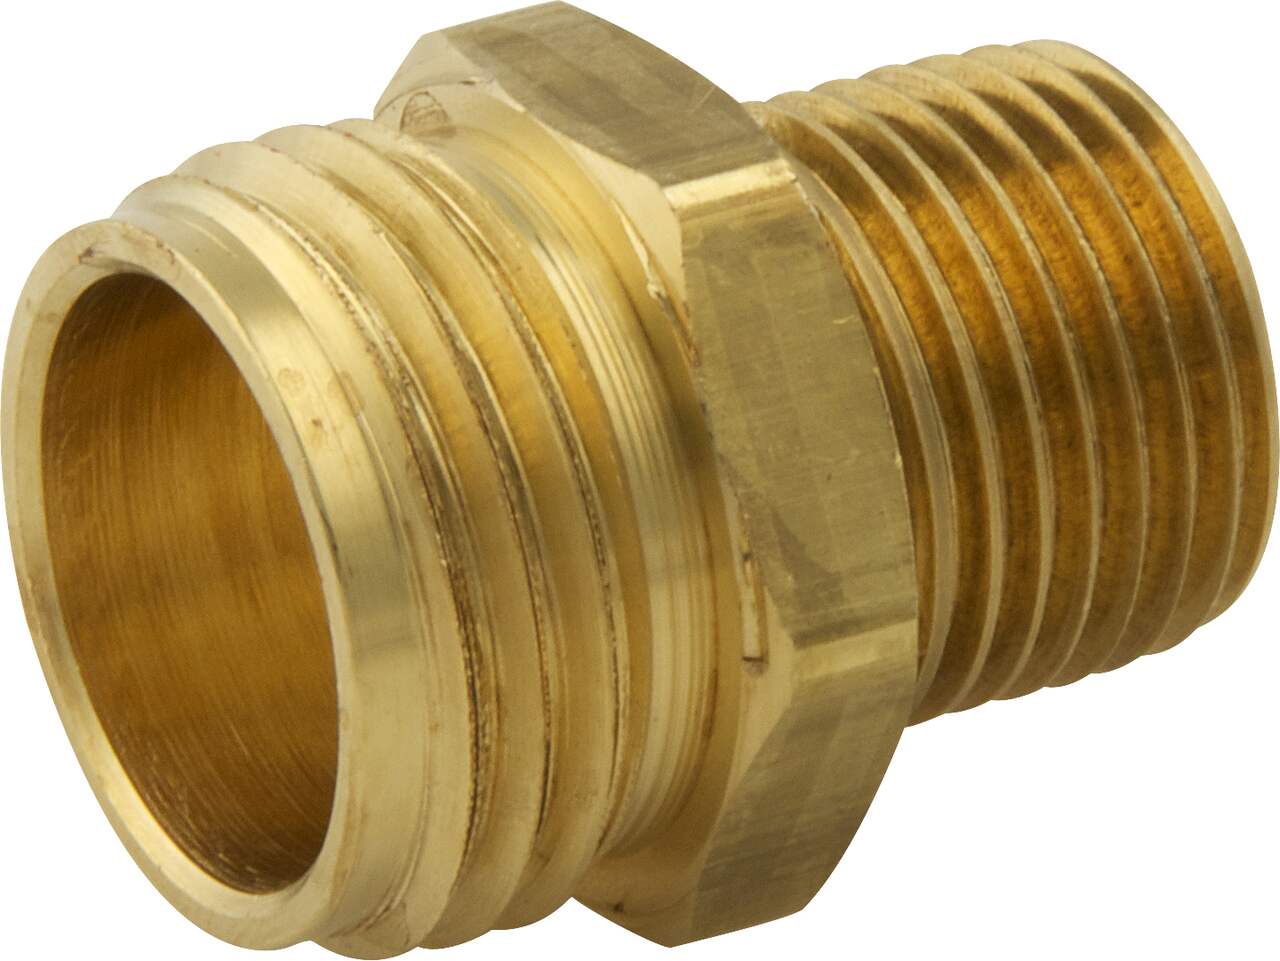 (2-pack) Brass Pipe Fitting, NPT Adapter, 1/2 Male Pipe x 1/2 Female Pipe  (1/2 x 1/2)